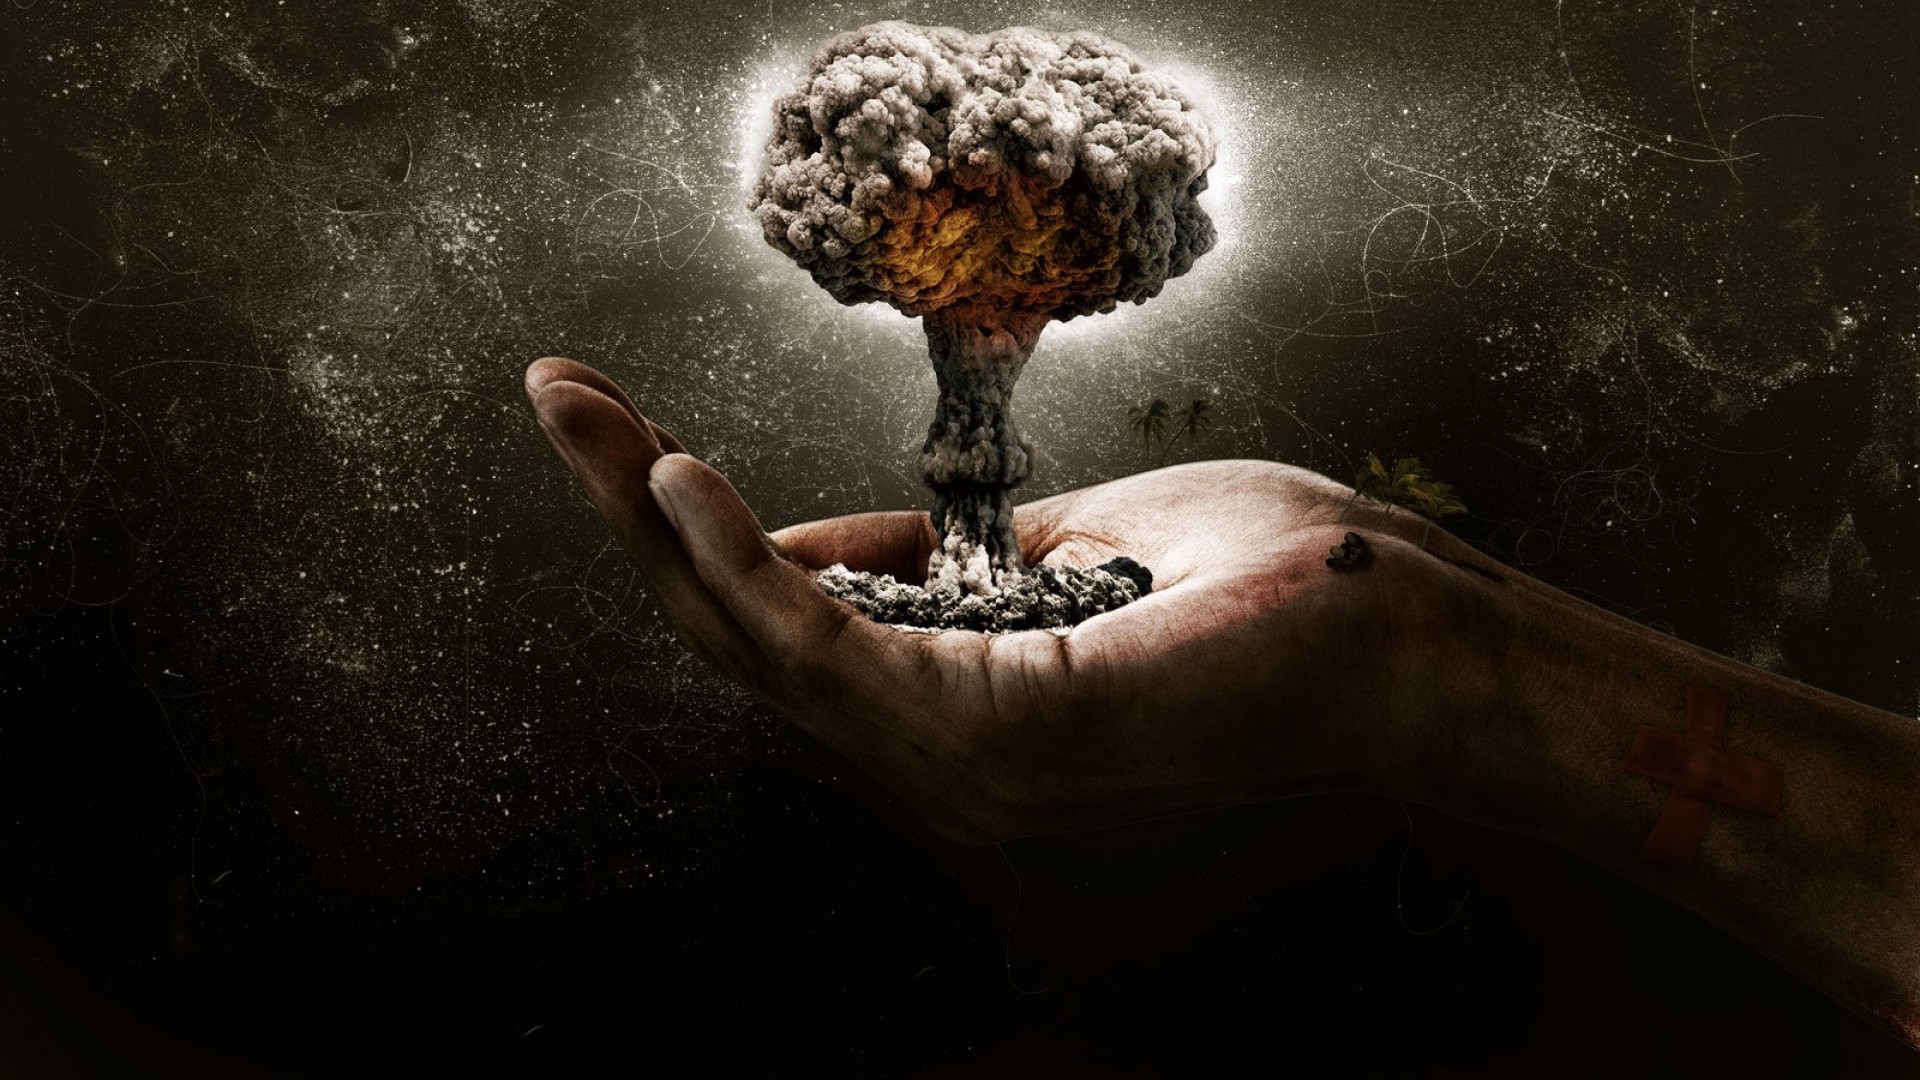 hands, Fingers, Scratch, Explosion, Photo manipulation, Atomic bomb, Bombs Wallpaper